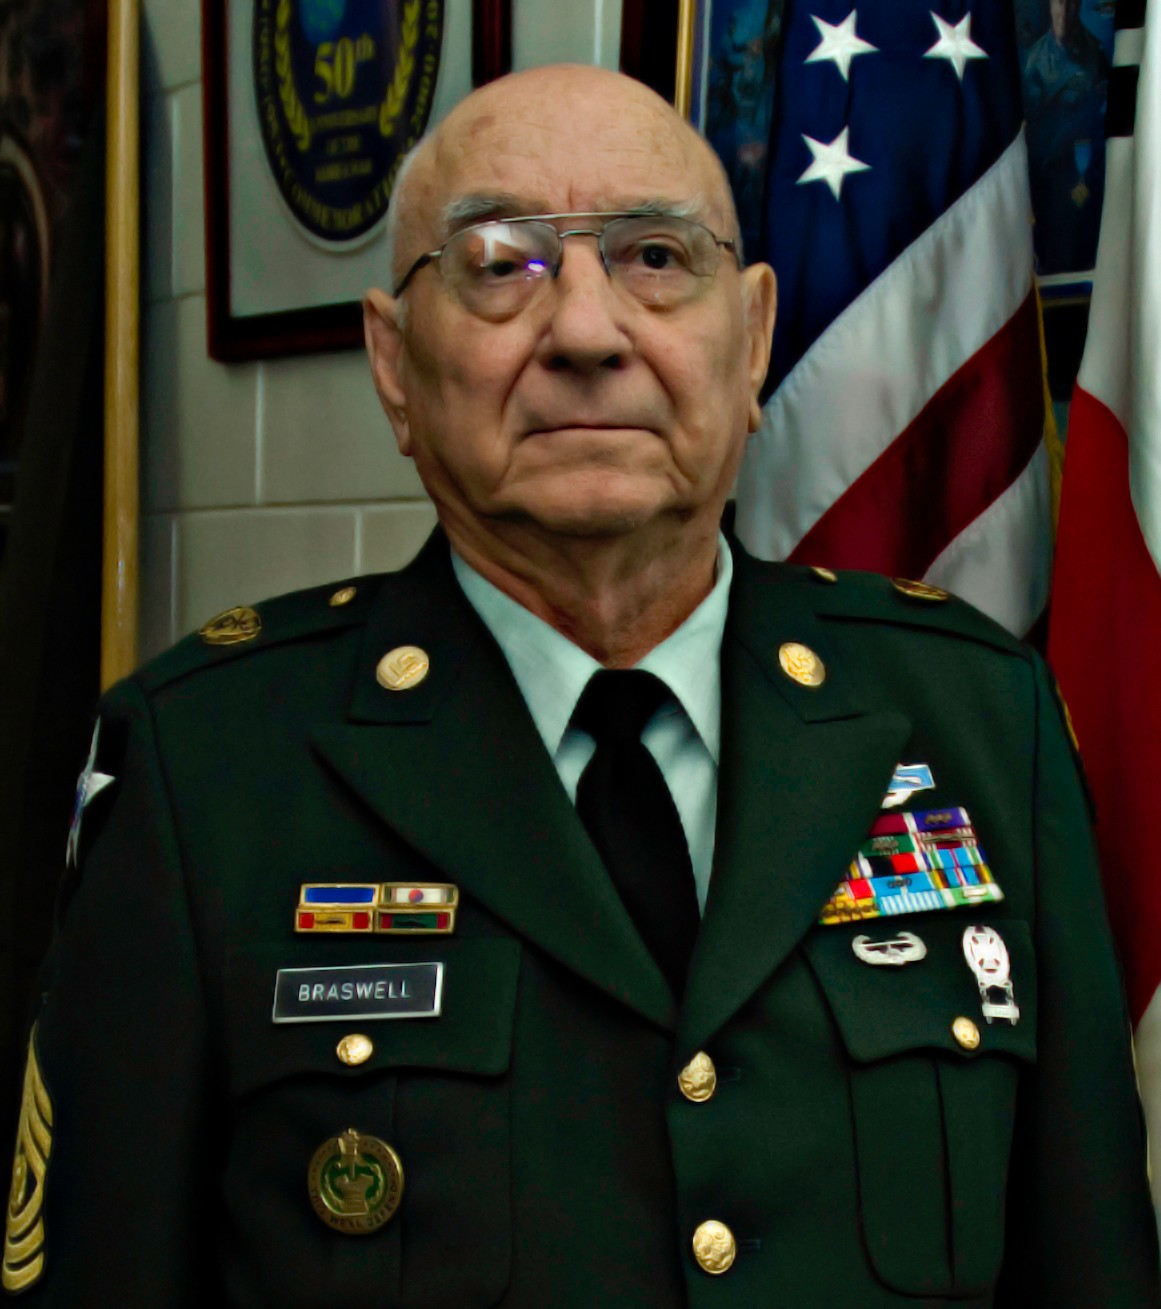 Profile Command Sgt. Maj. (Ret.) Alfred Braswell Article The